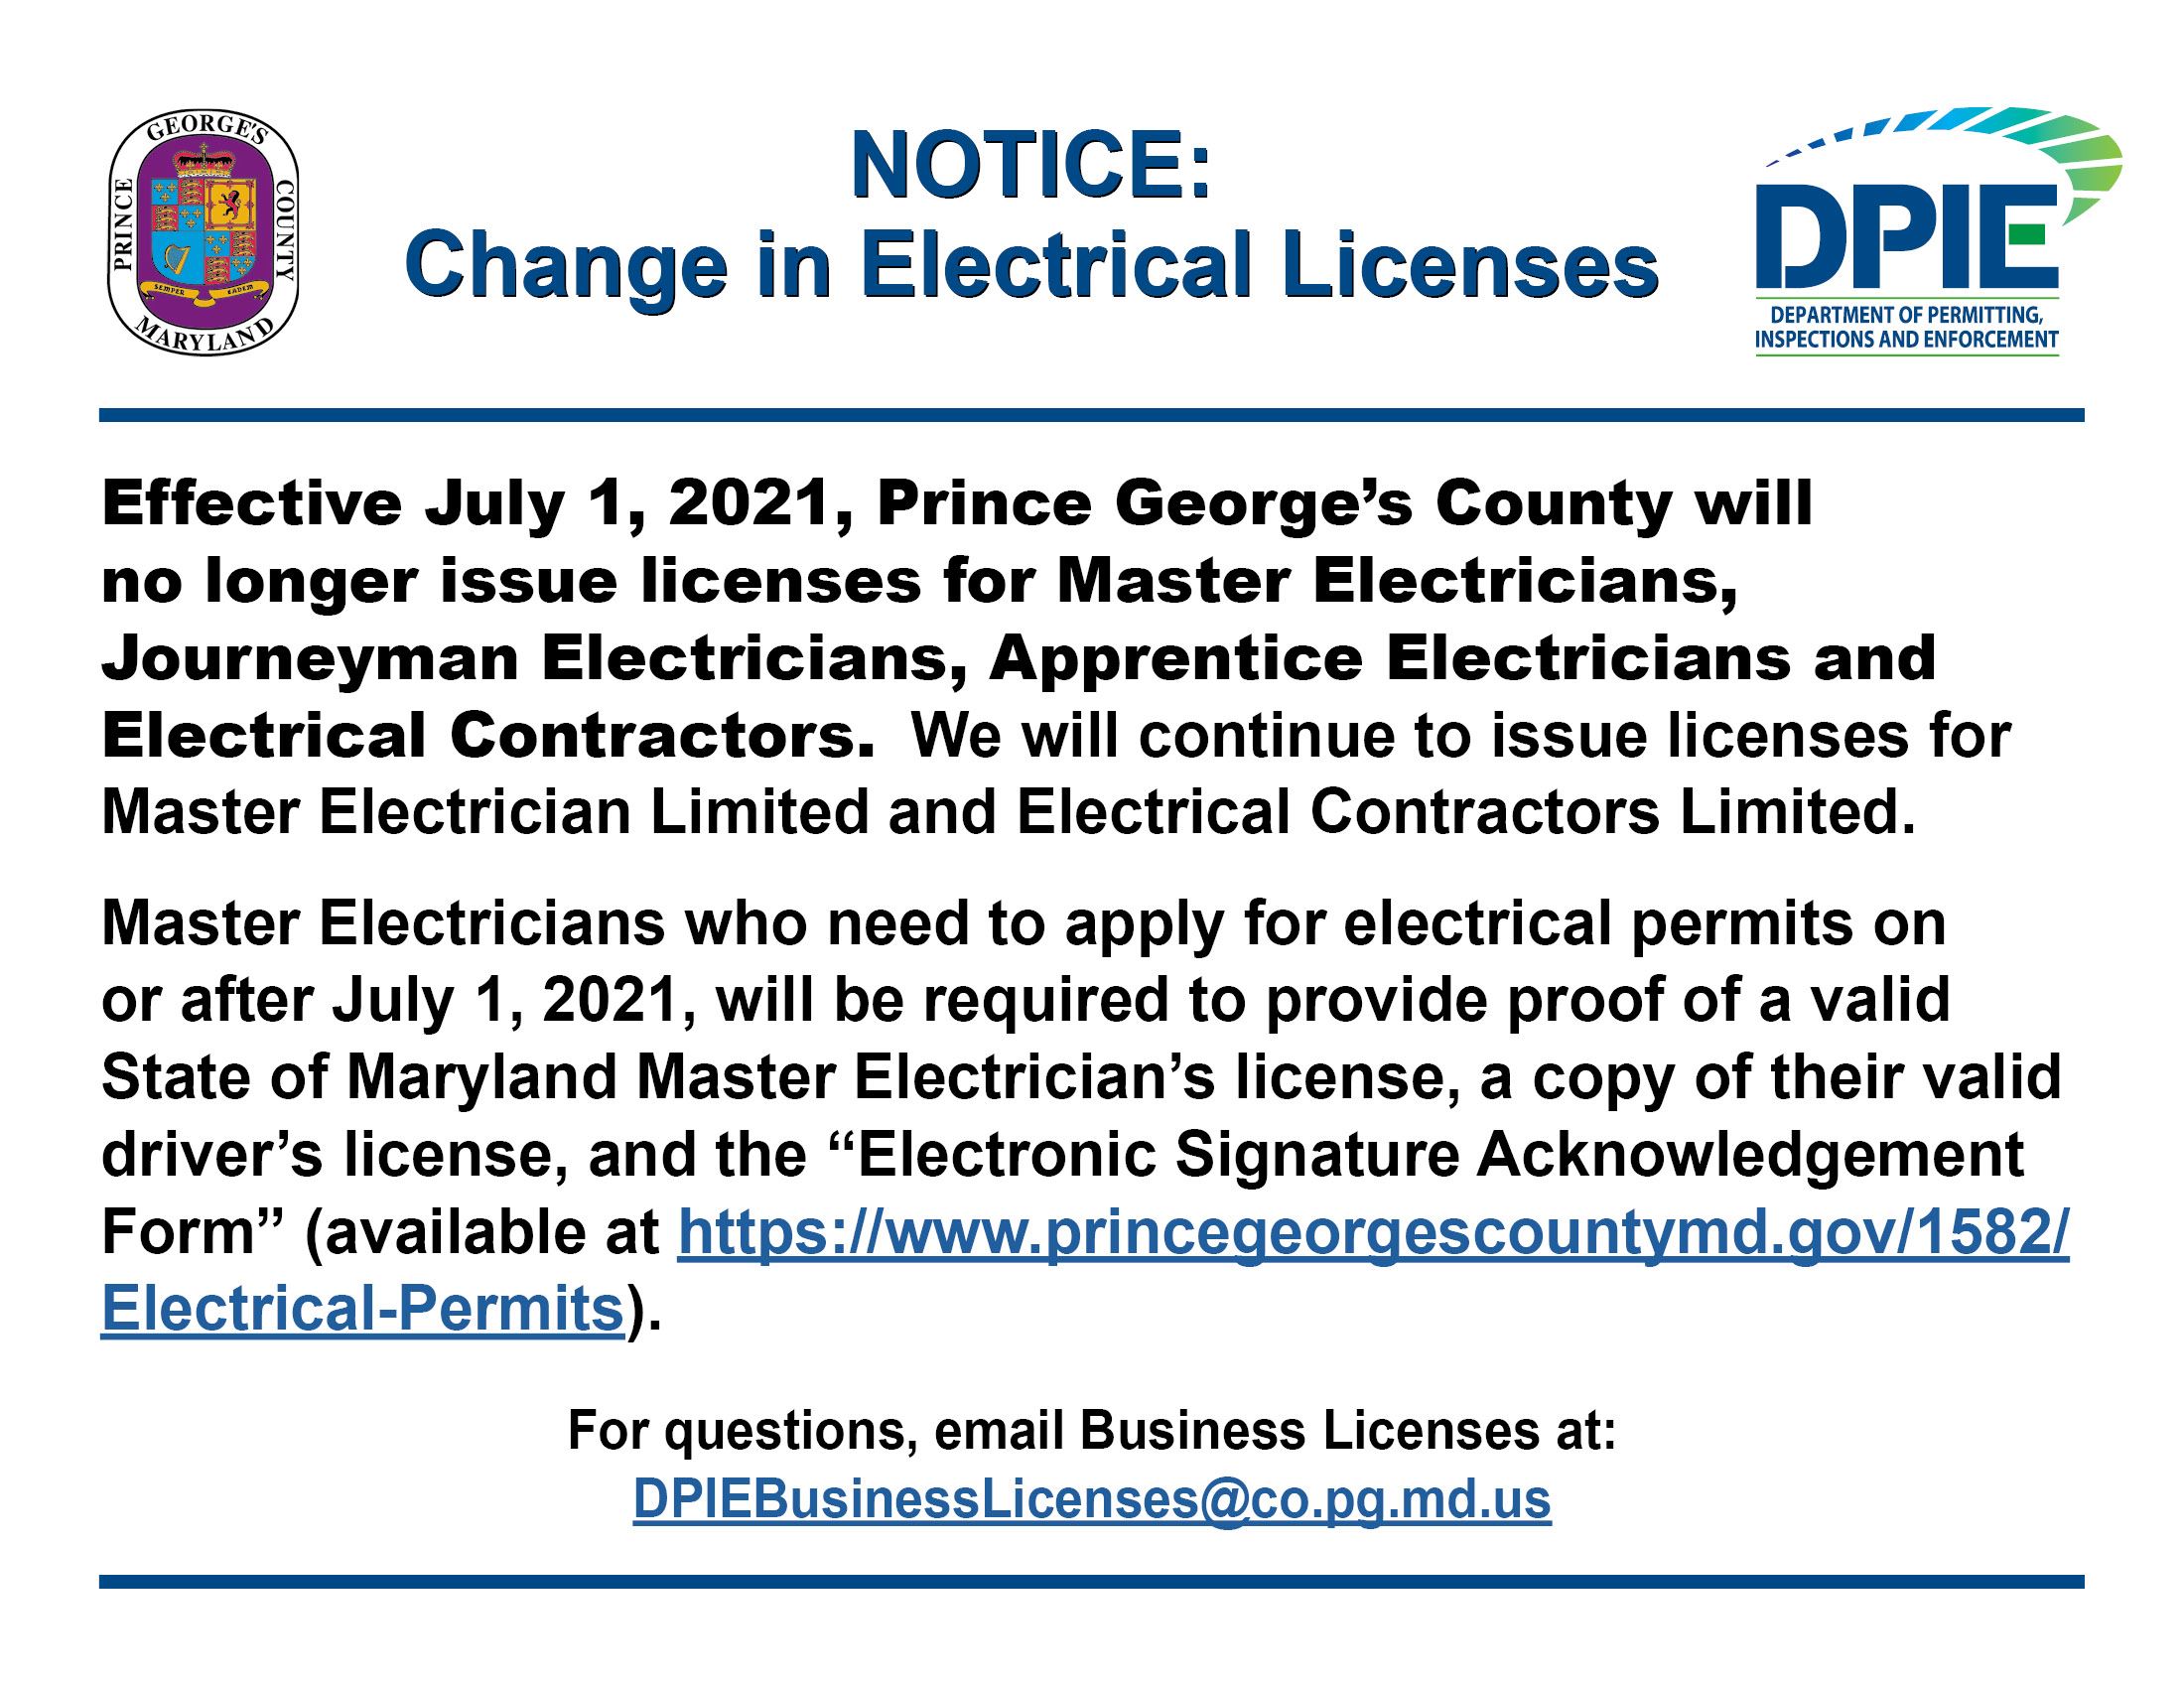 Notice - Change in Electrical Licenses